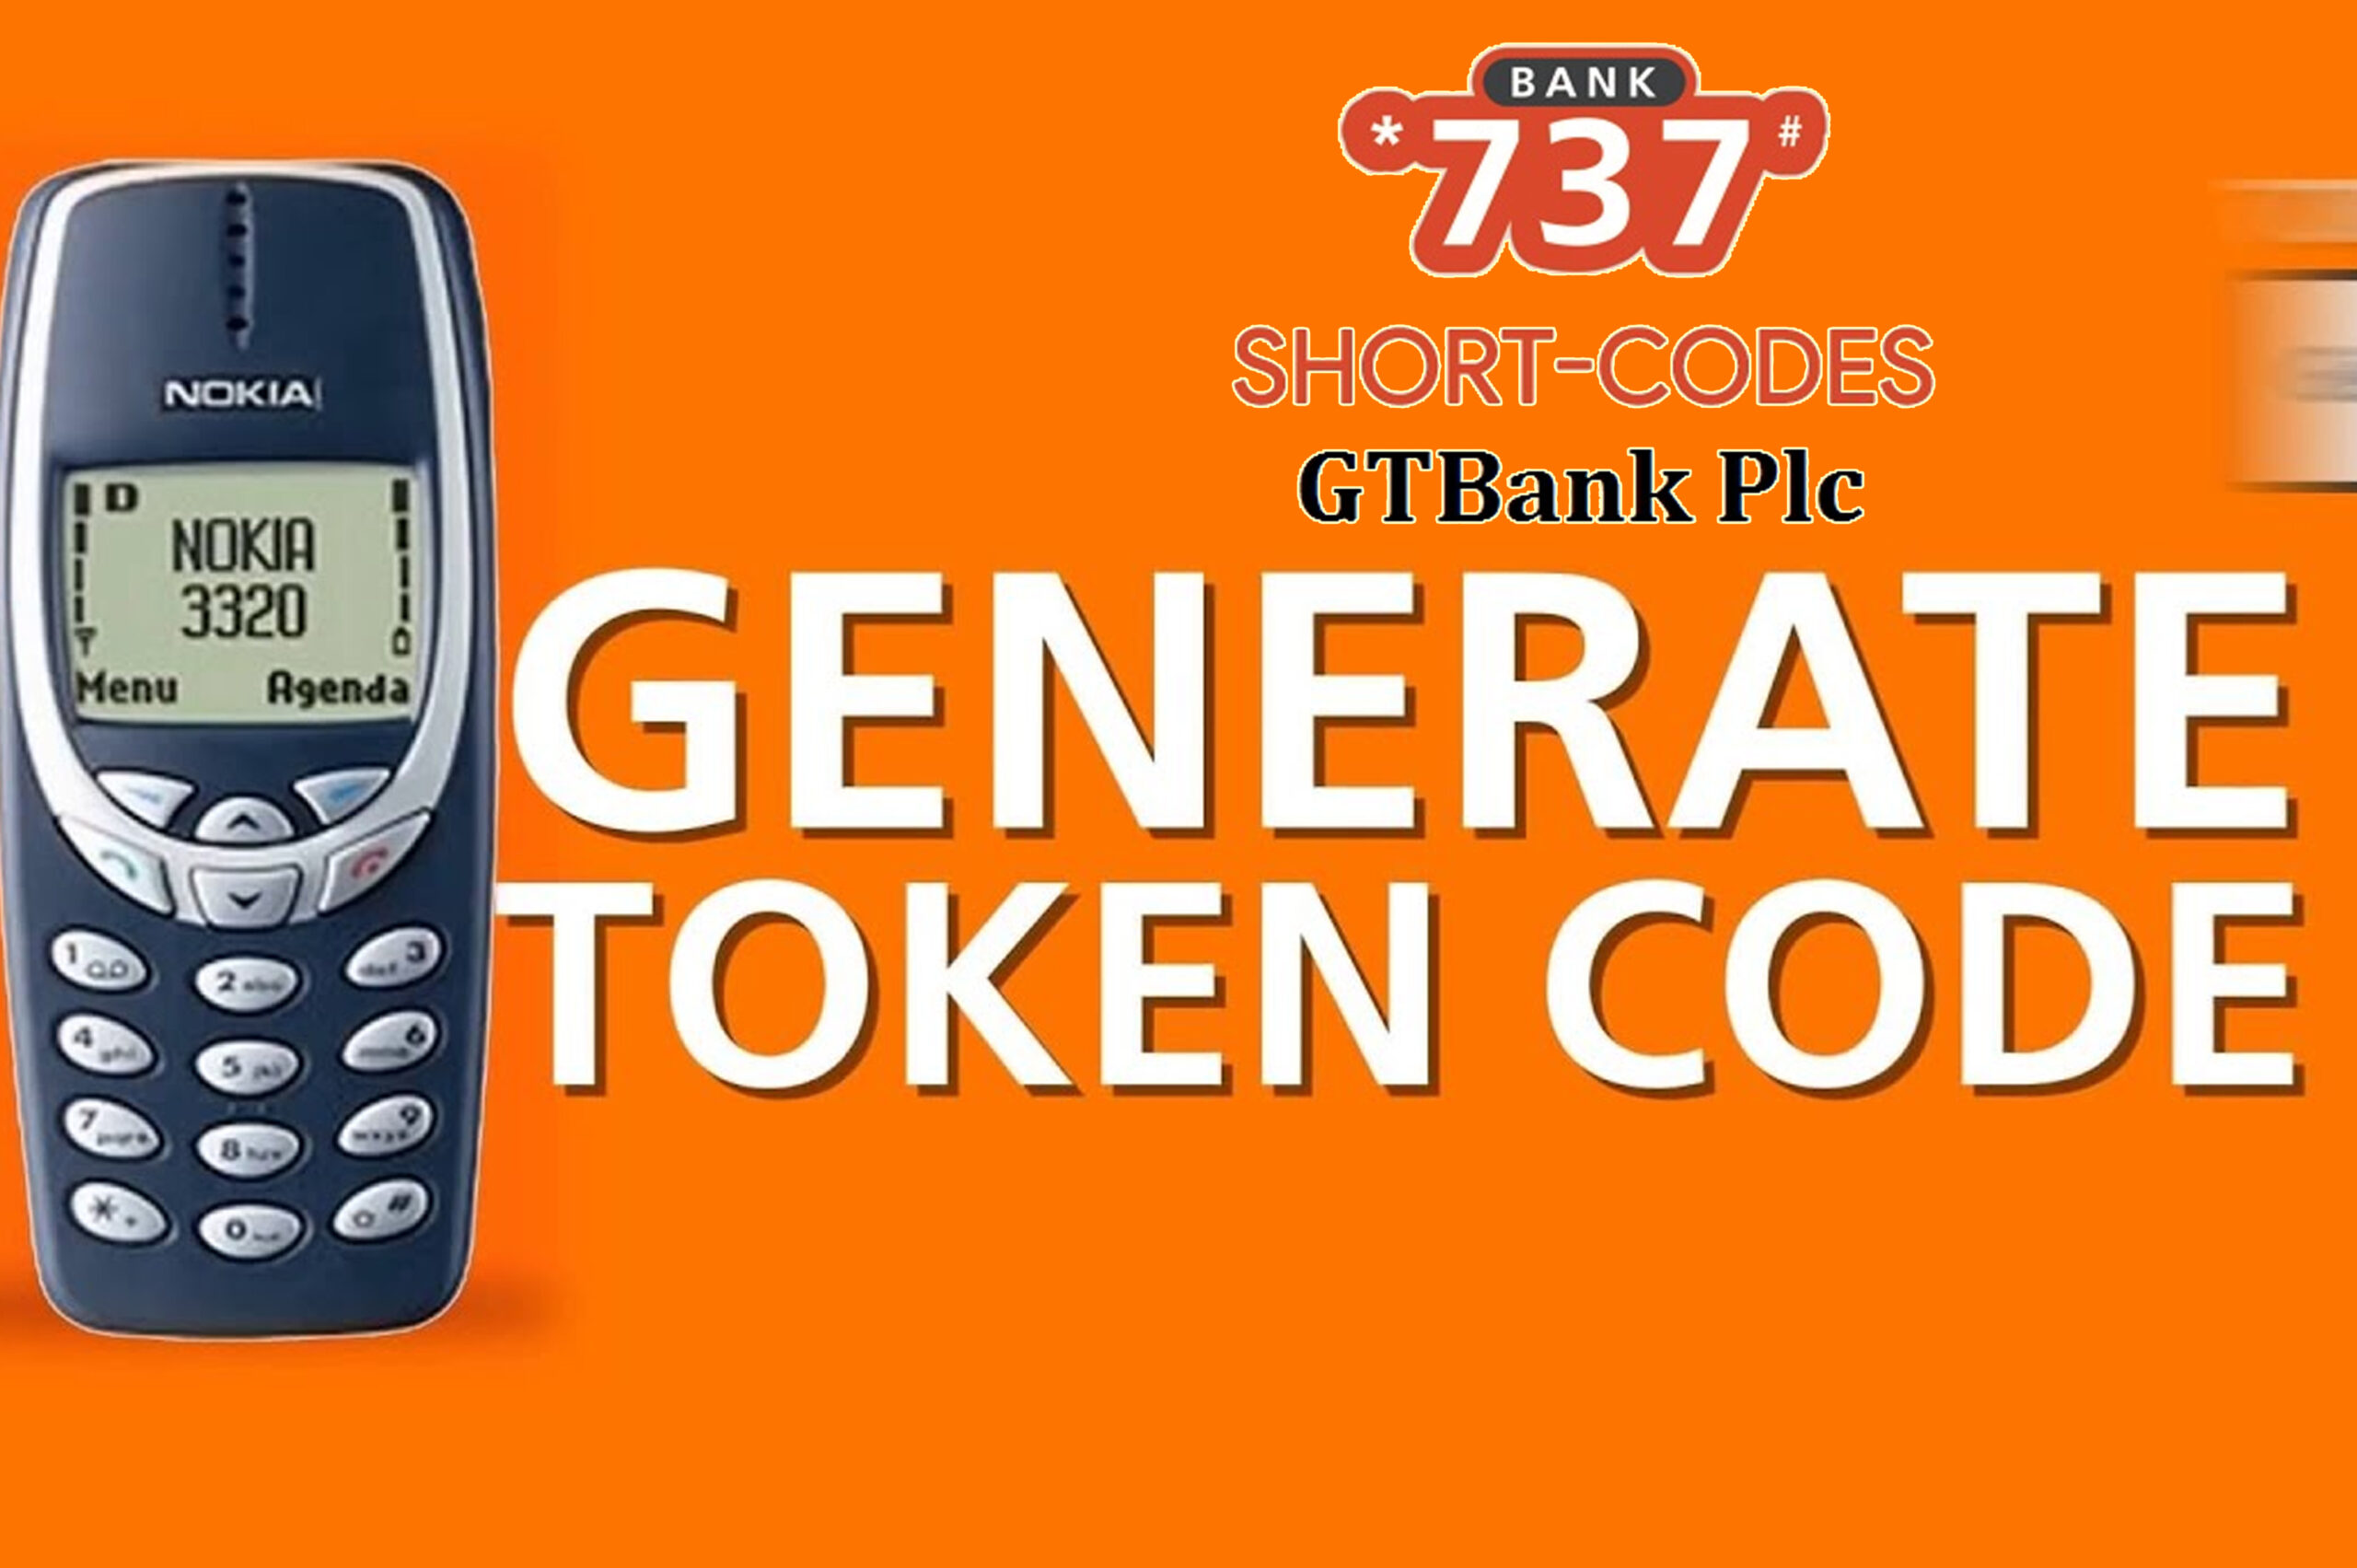 how to generate token code for gtbank